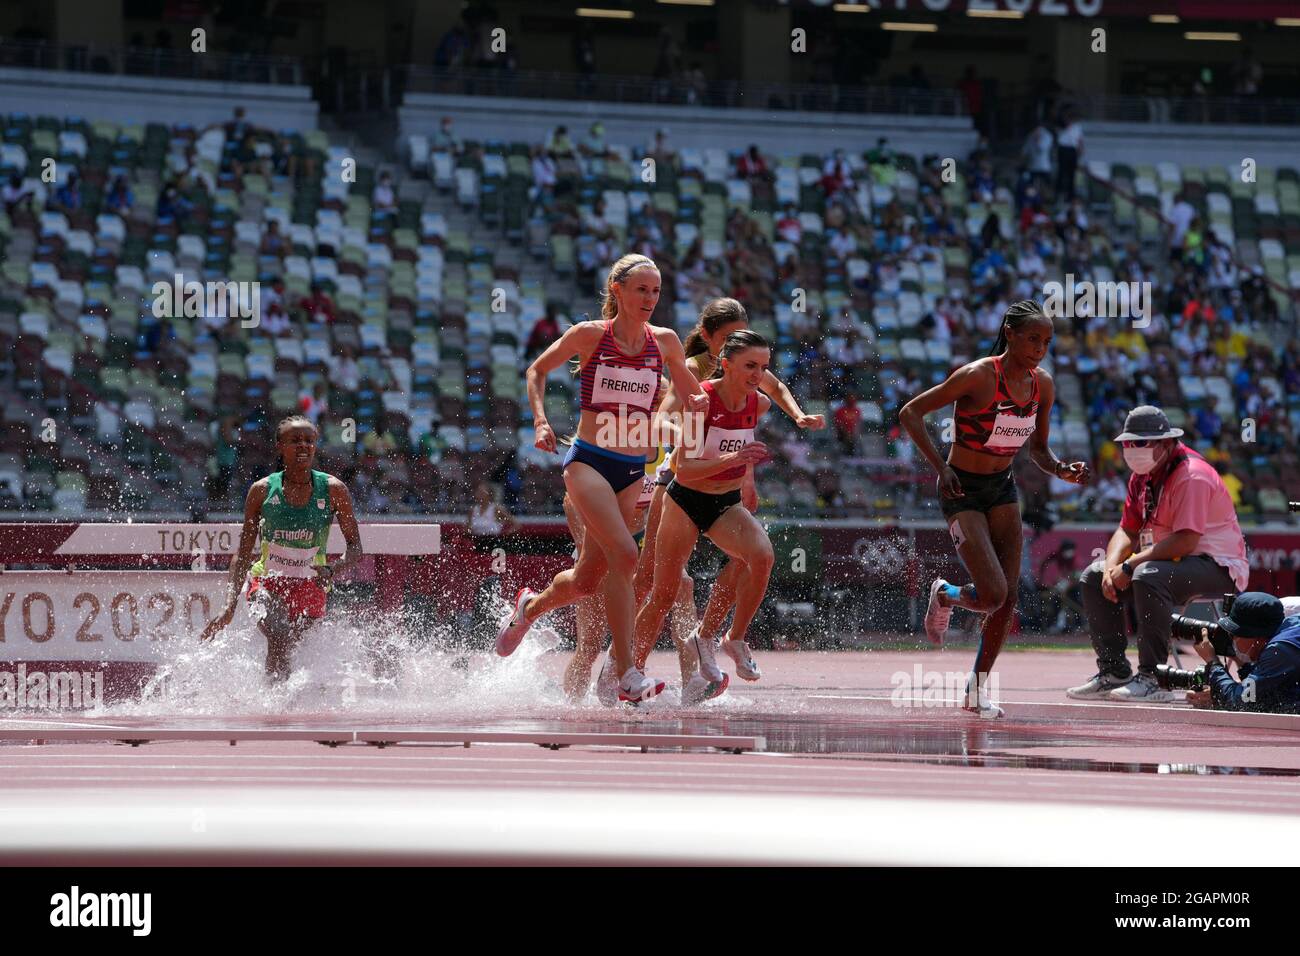 1st August 2021; Olympic Stadium, Tokyo, Japan: Tokyo 2020 Olympic summer games day 9; Womens 3000m steeplechase heats: GEGA Luiza of Albania and eventual winner FRERICHS Courtney of USA take the water jump as CHEPKOECH Beatrice of Kenya powers away Stock Photo